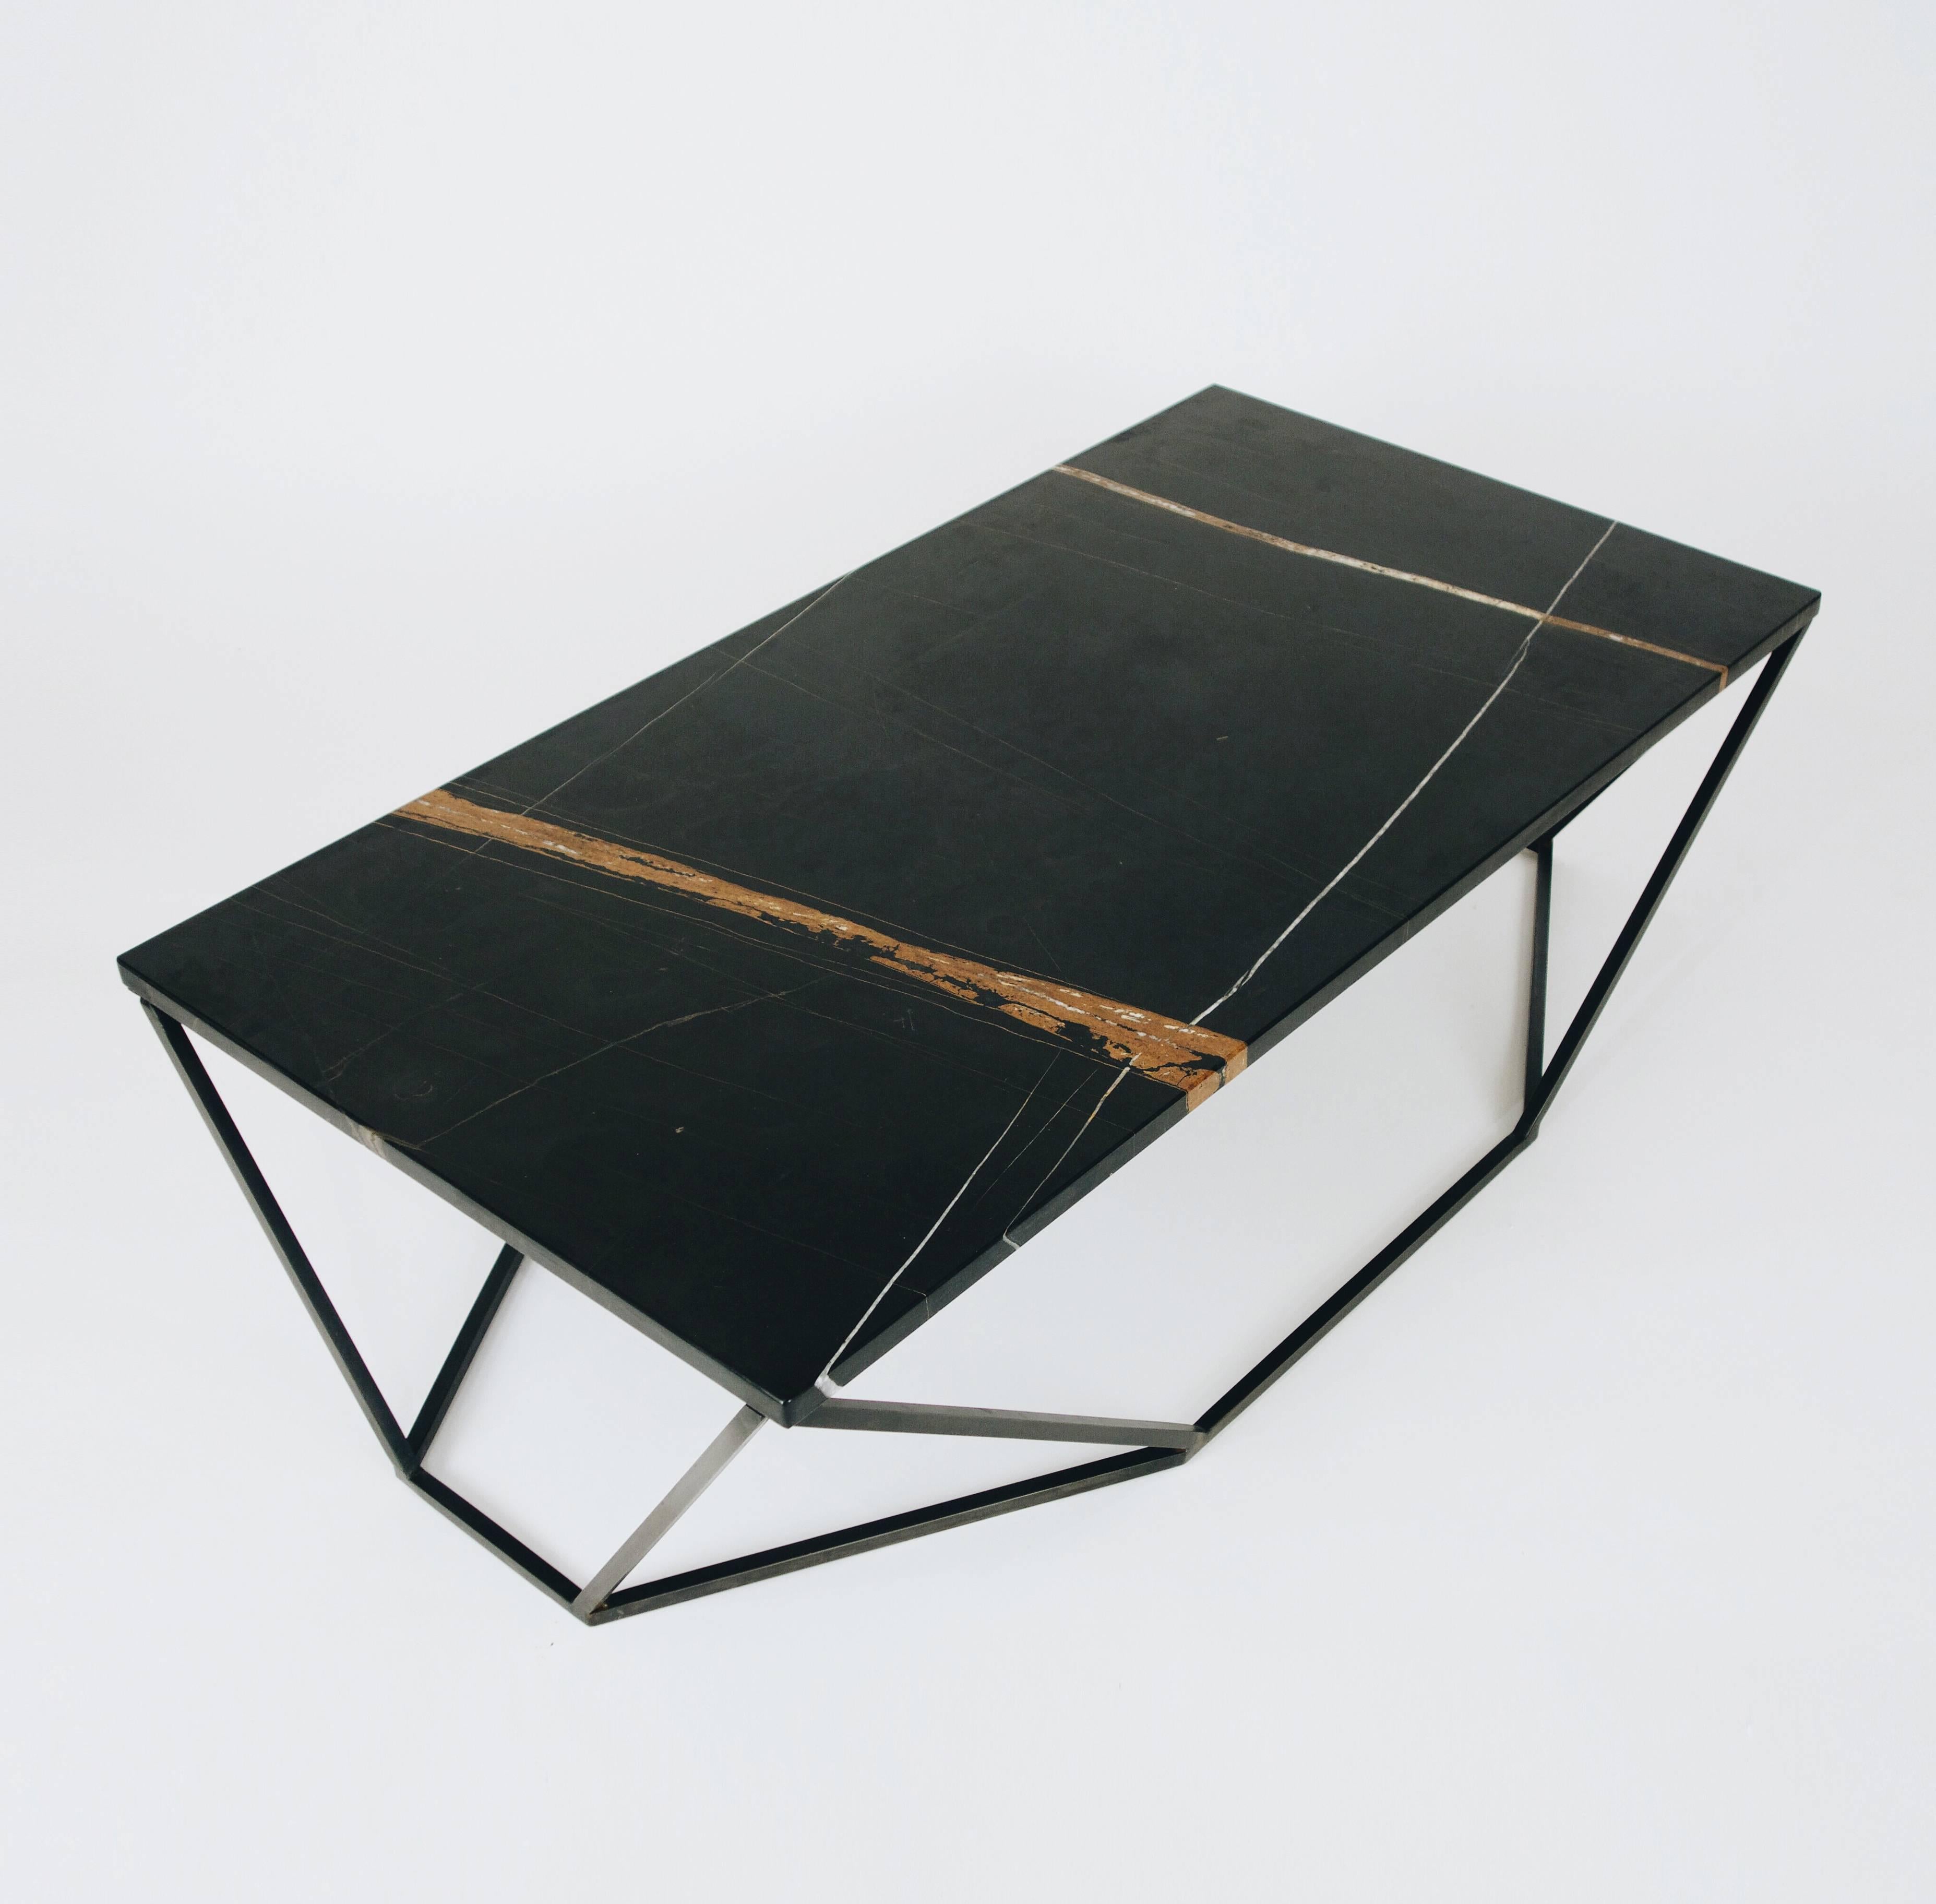 Dusk Coffee Table, Small in Polished Black Marble and Blackened Steel (amerikanisch)